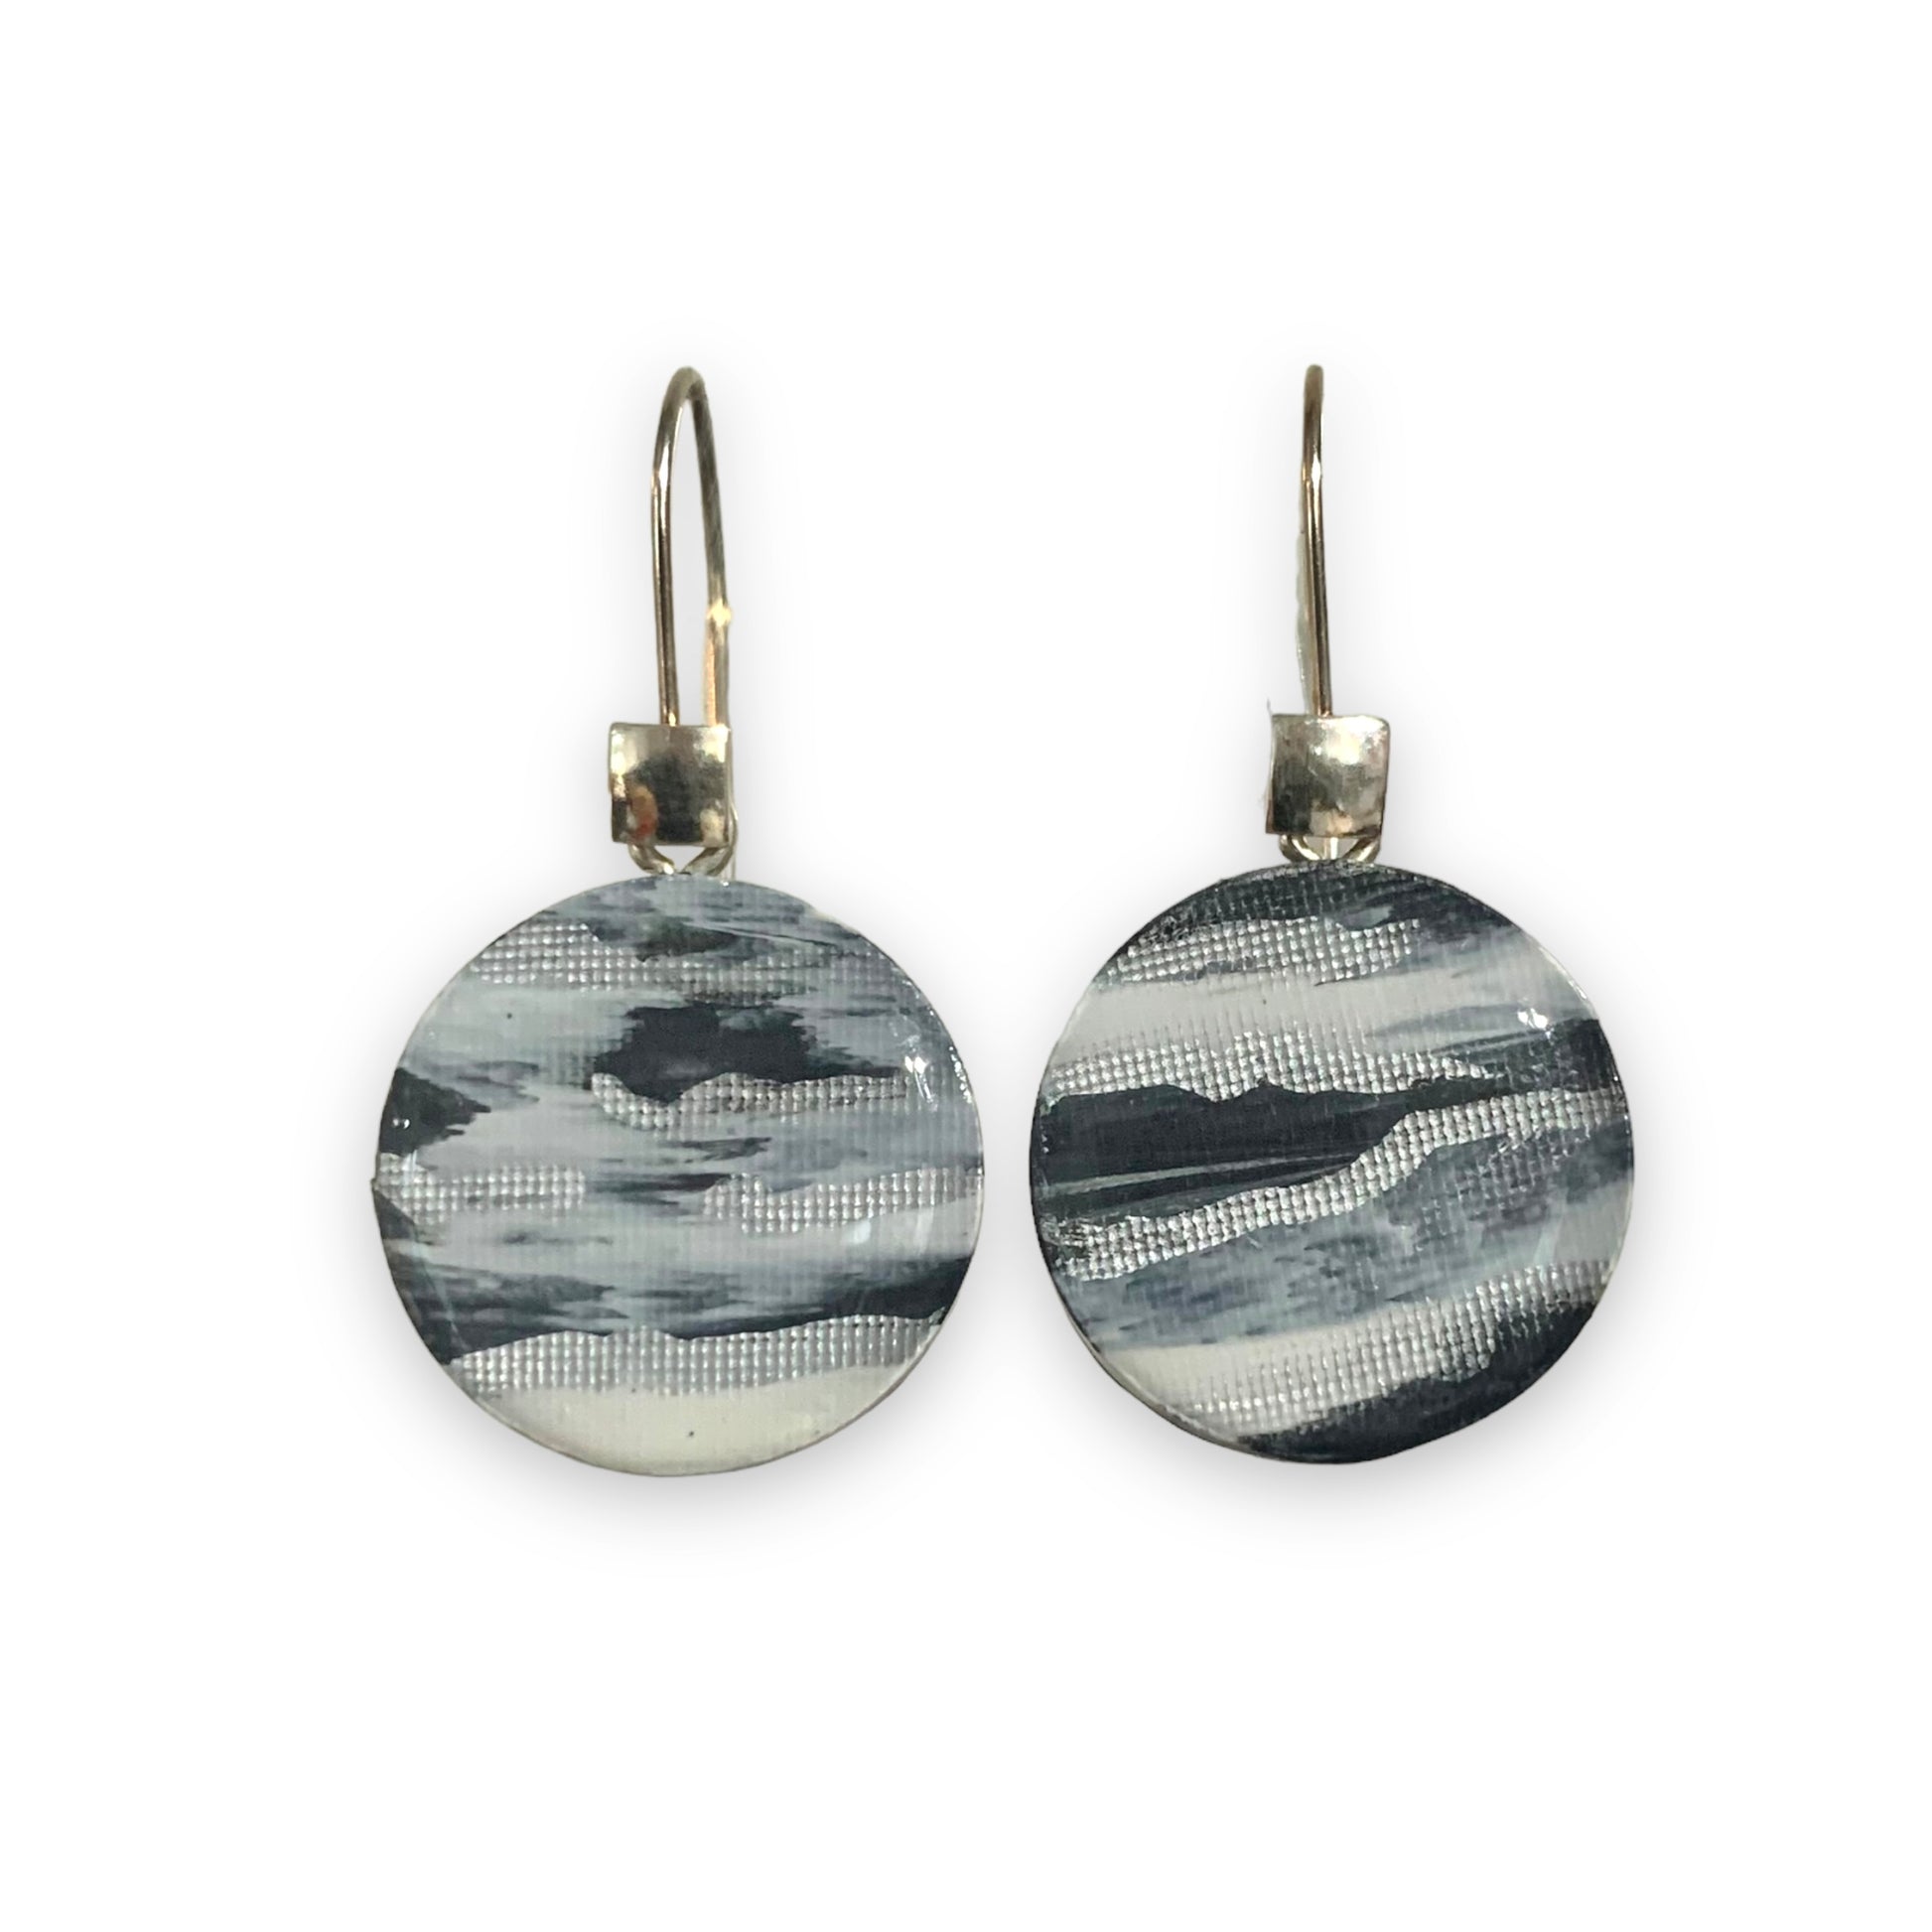 Black and White Silver handmade jewellery dangle earrings made from recycled materials circle drops eco friendly gift